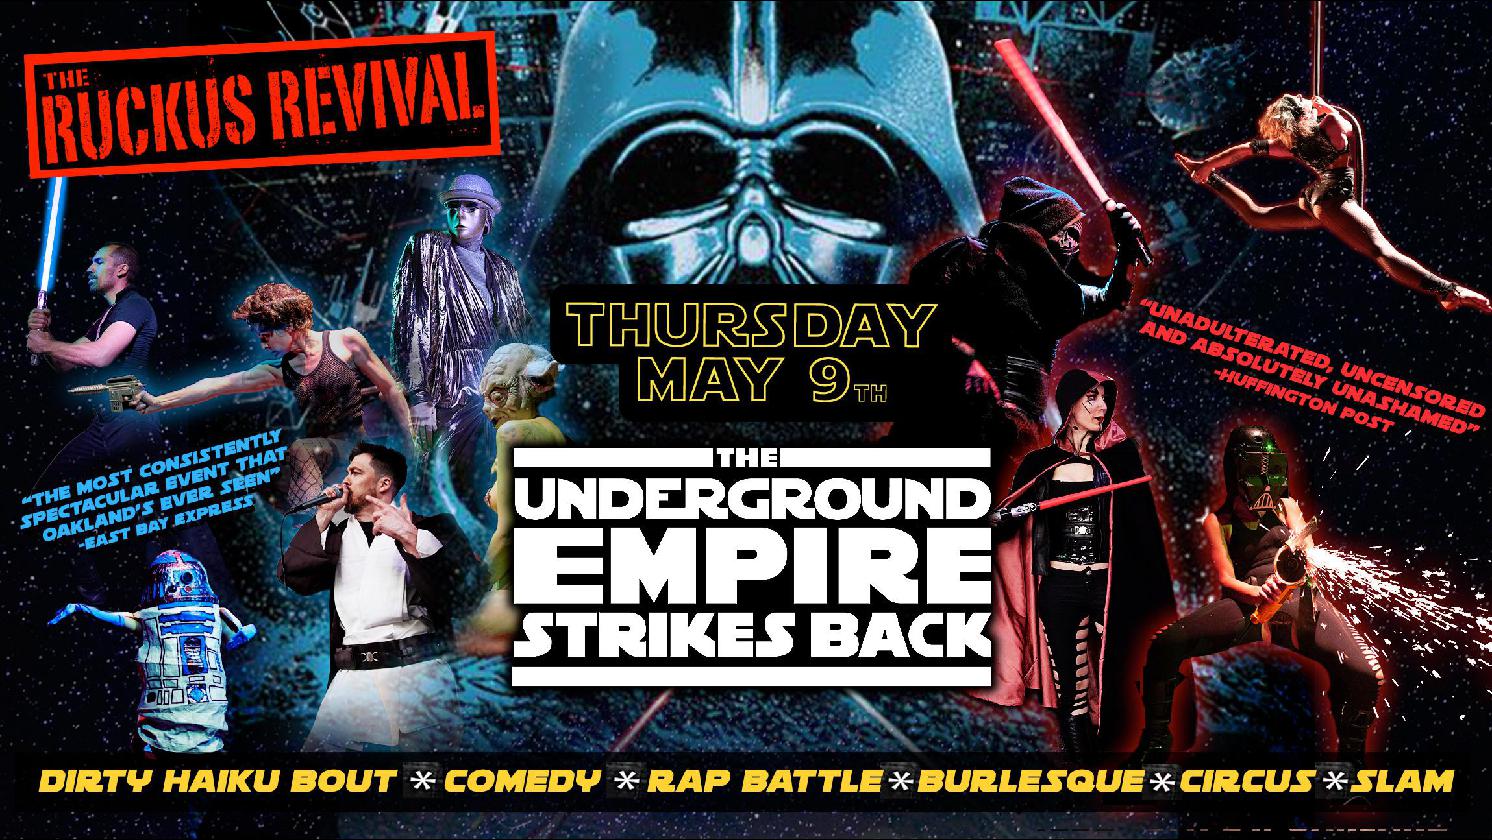 THE RUCKUS REVIVAL: The Underground Strikes Back!